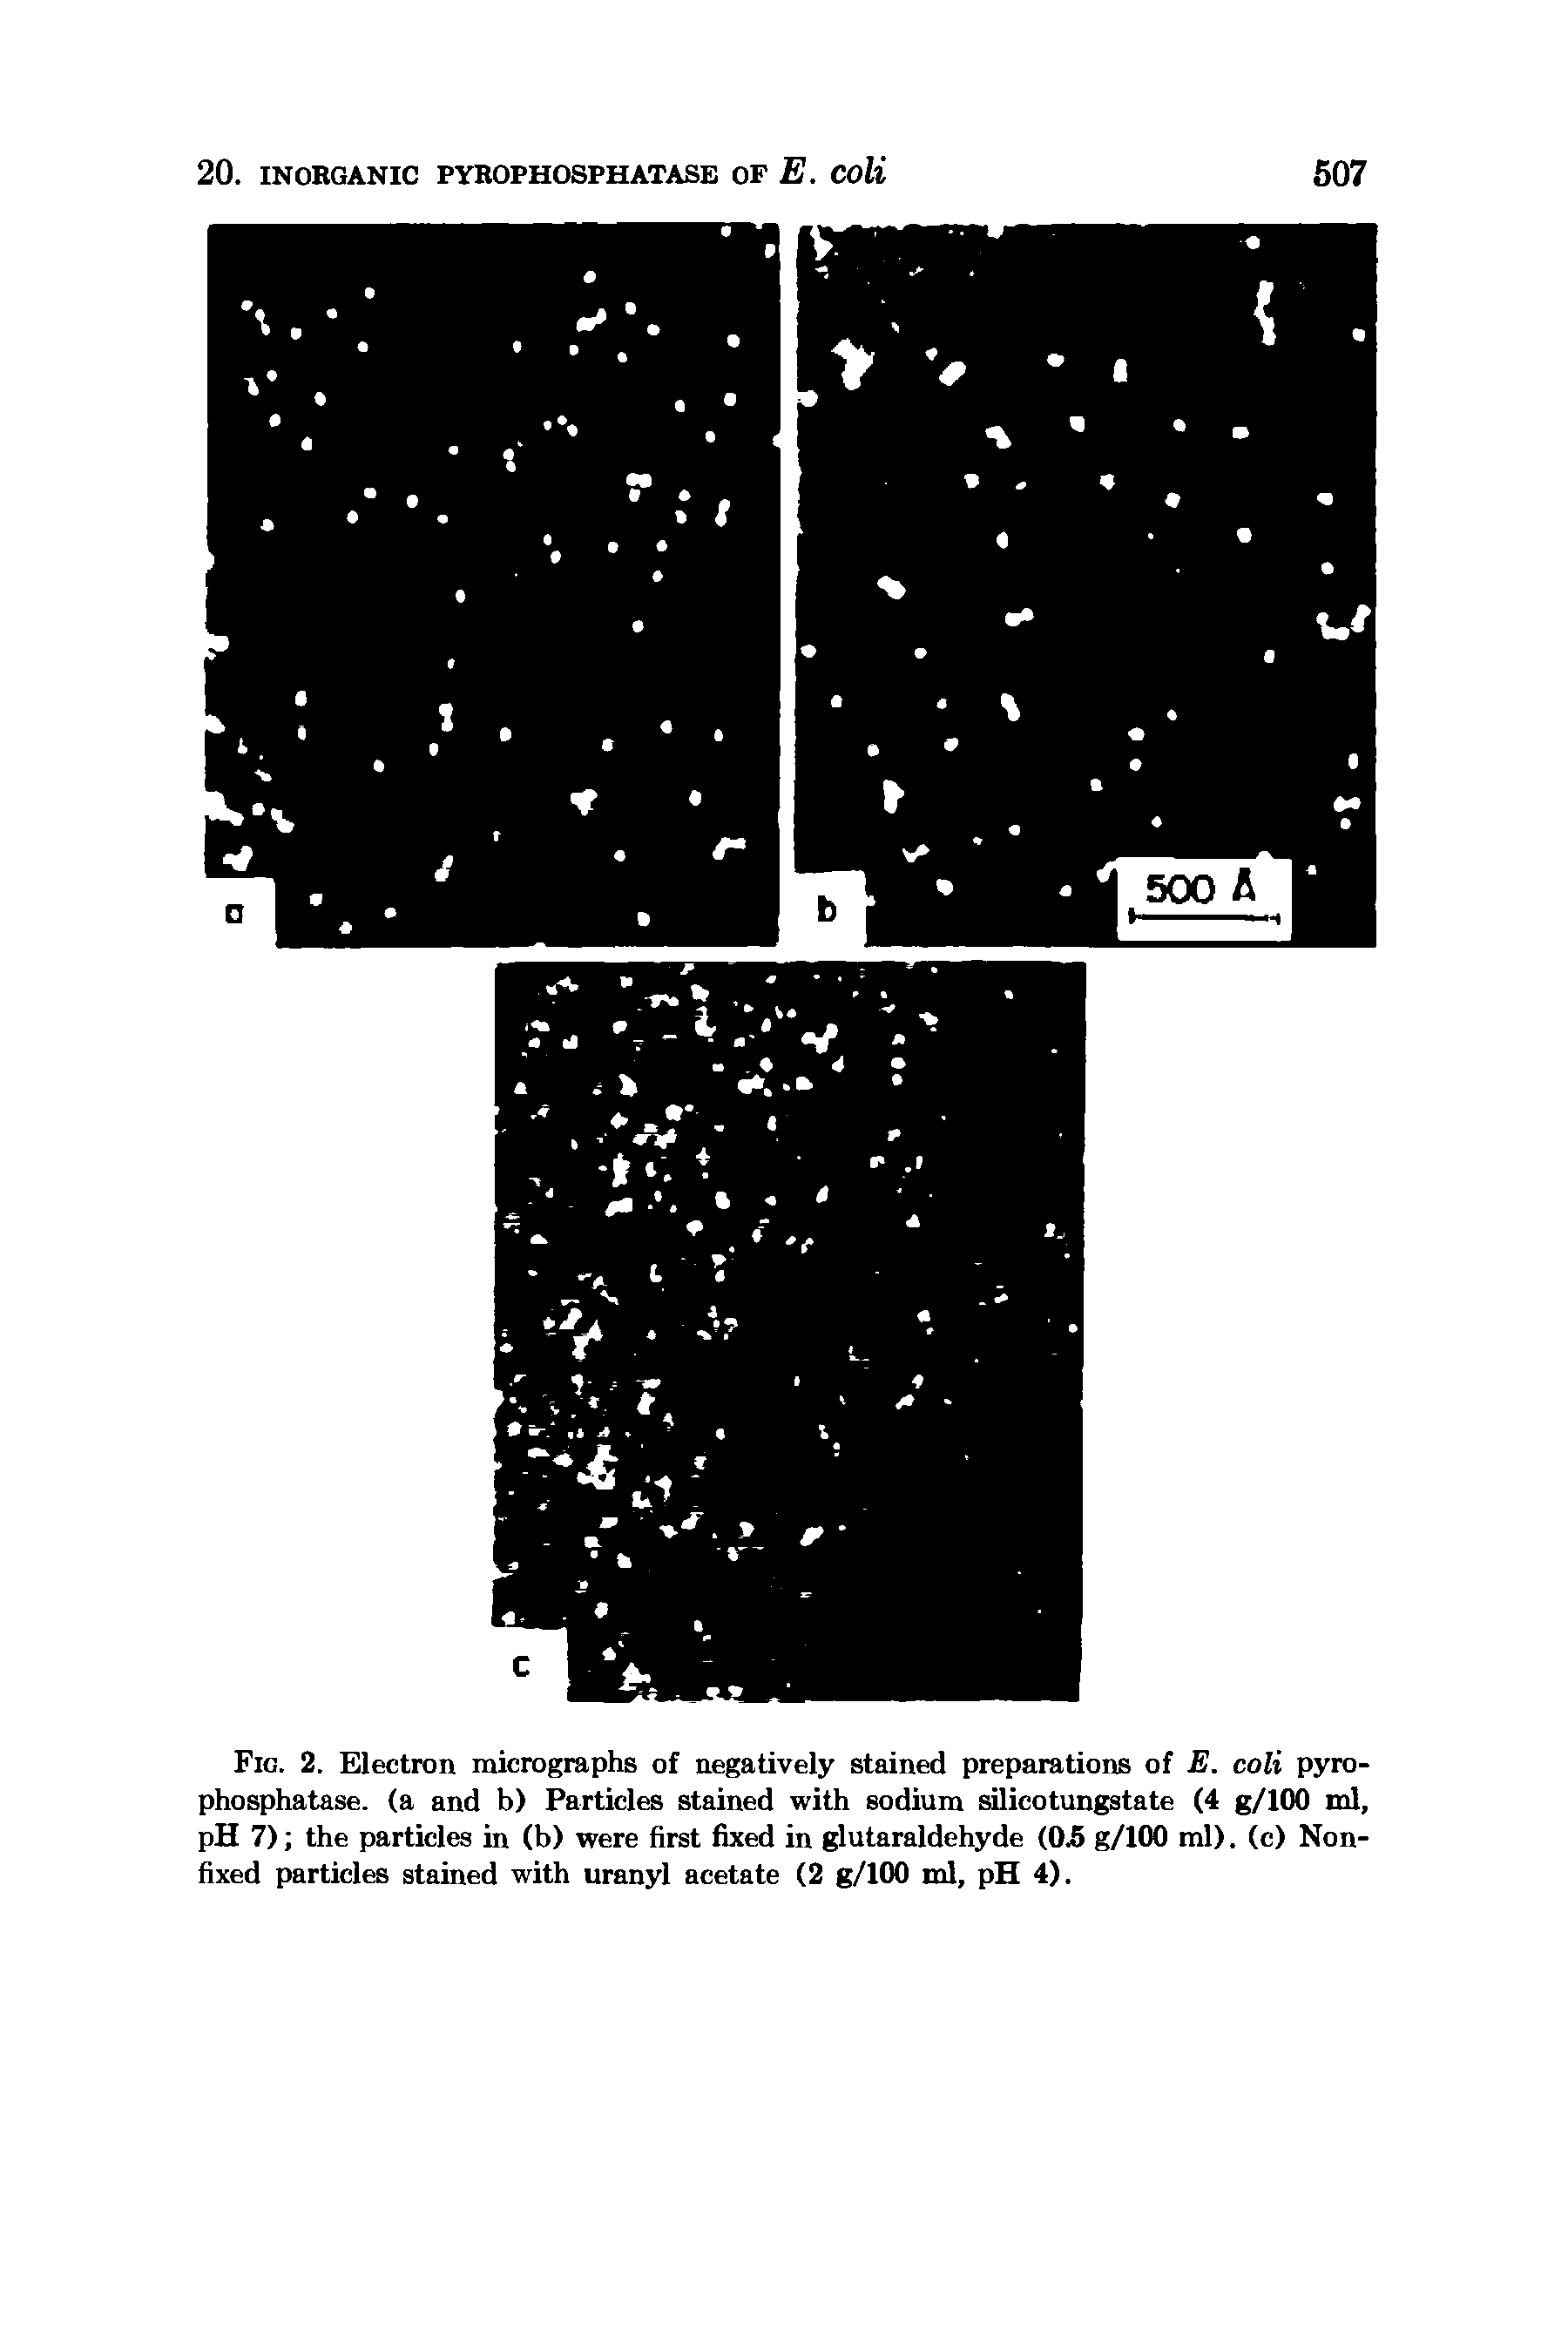 Fig. 2. Electron micrographs of negatively stained preparations of E. coli pyrophosphatase. (a and b) Particles stained with sodium silicotungstate (4 g/100 ml, pH 7) the particles in (b) were first fixed in glutaraldehyde (05 g/100 ml). (c) Non-fixed particles stained with uranyl acetate (2 g/100 ml, pH 4).